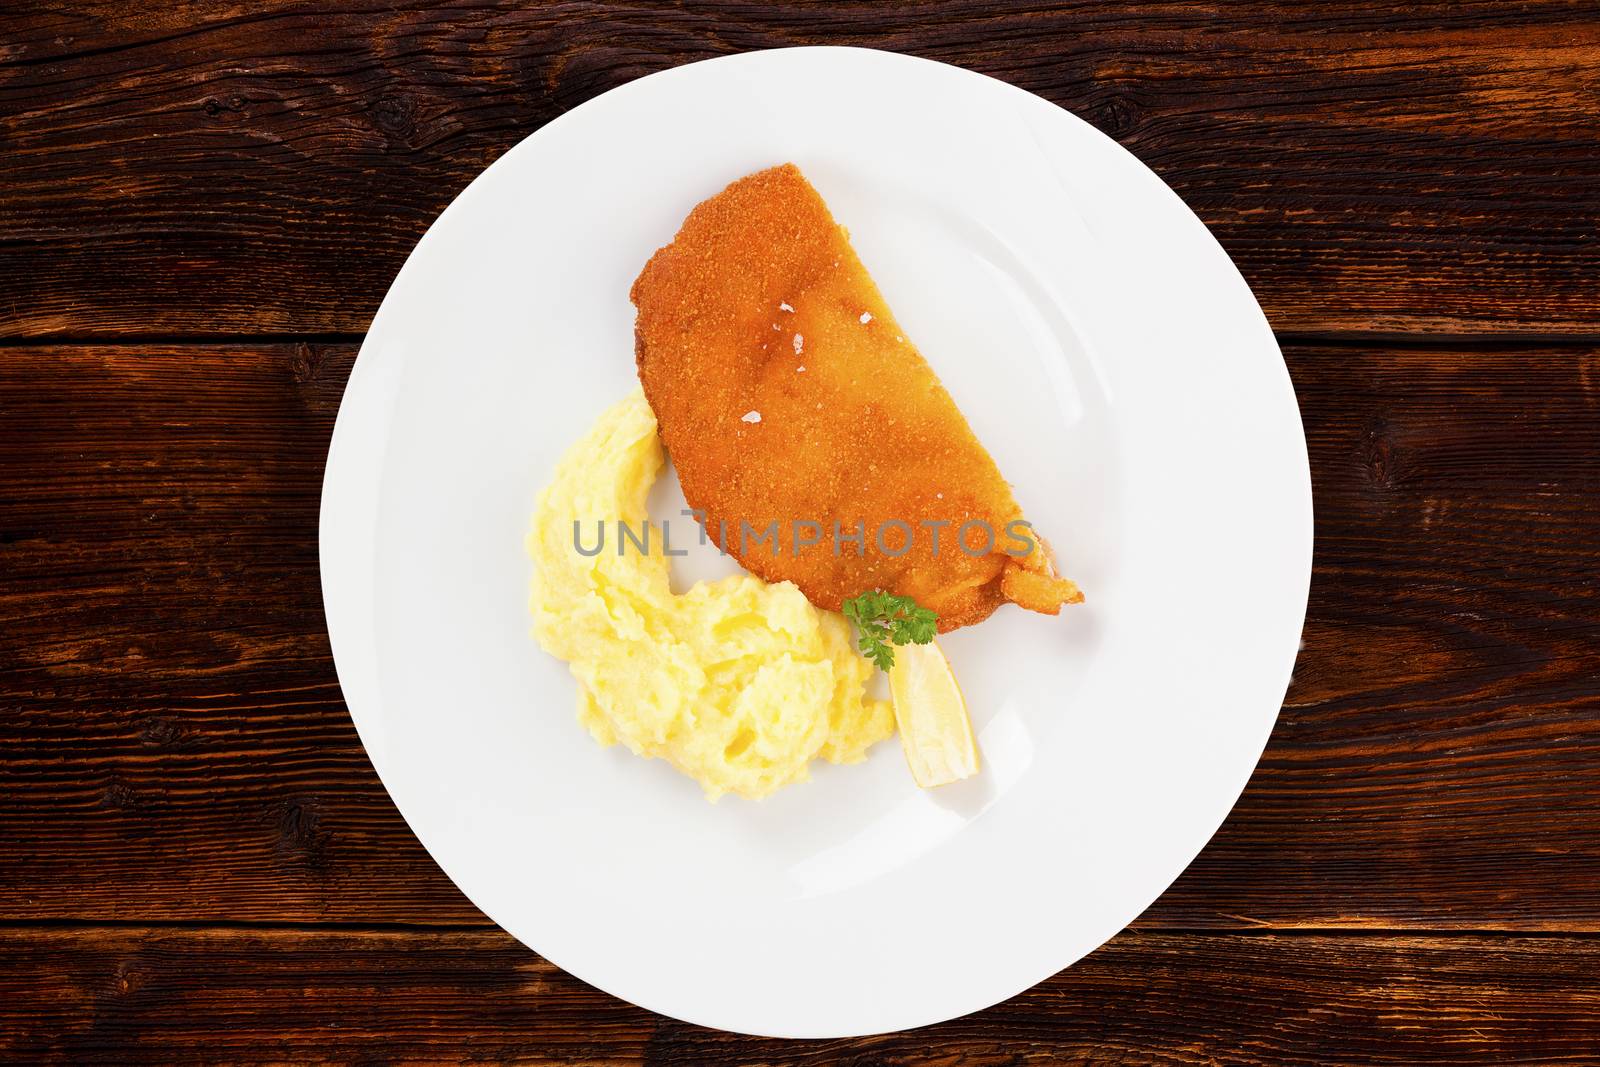 Delicious wiener schnitzel with mashed potatoes on plate on wooden background, top view. Traditional european cuisine.